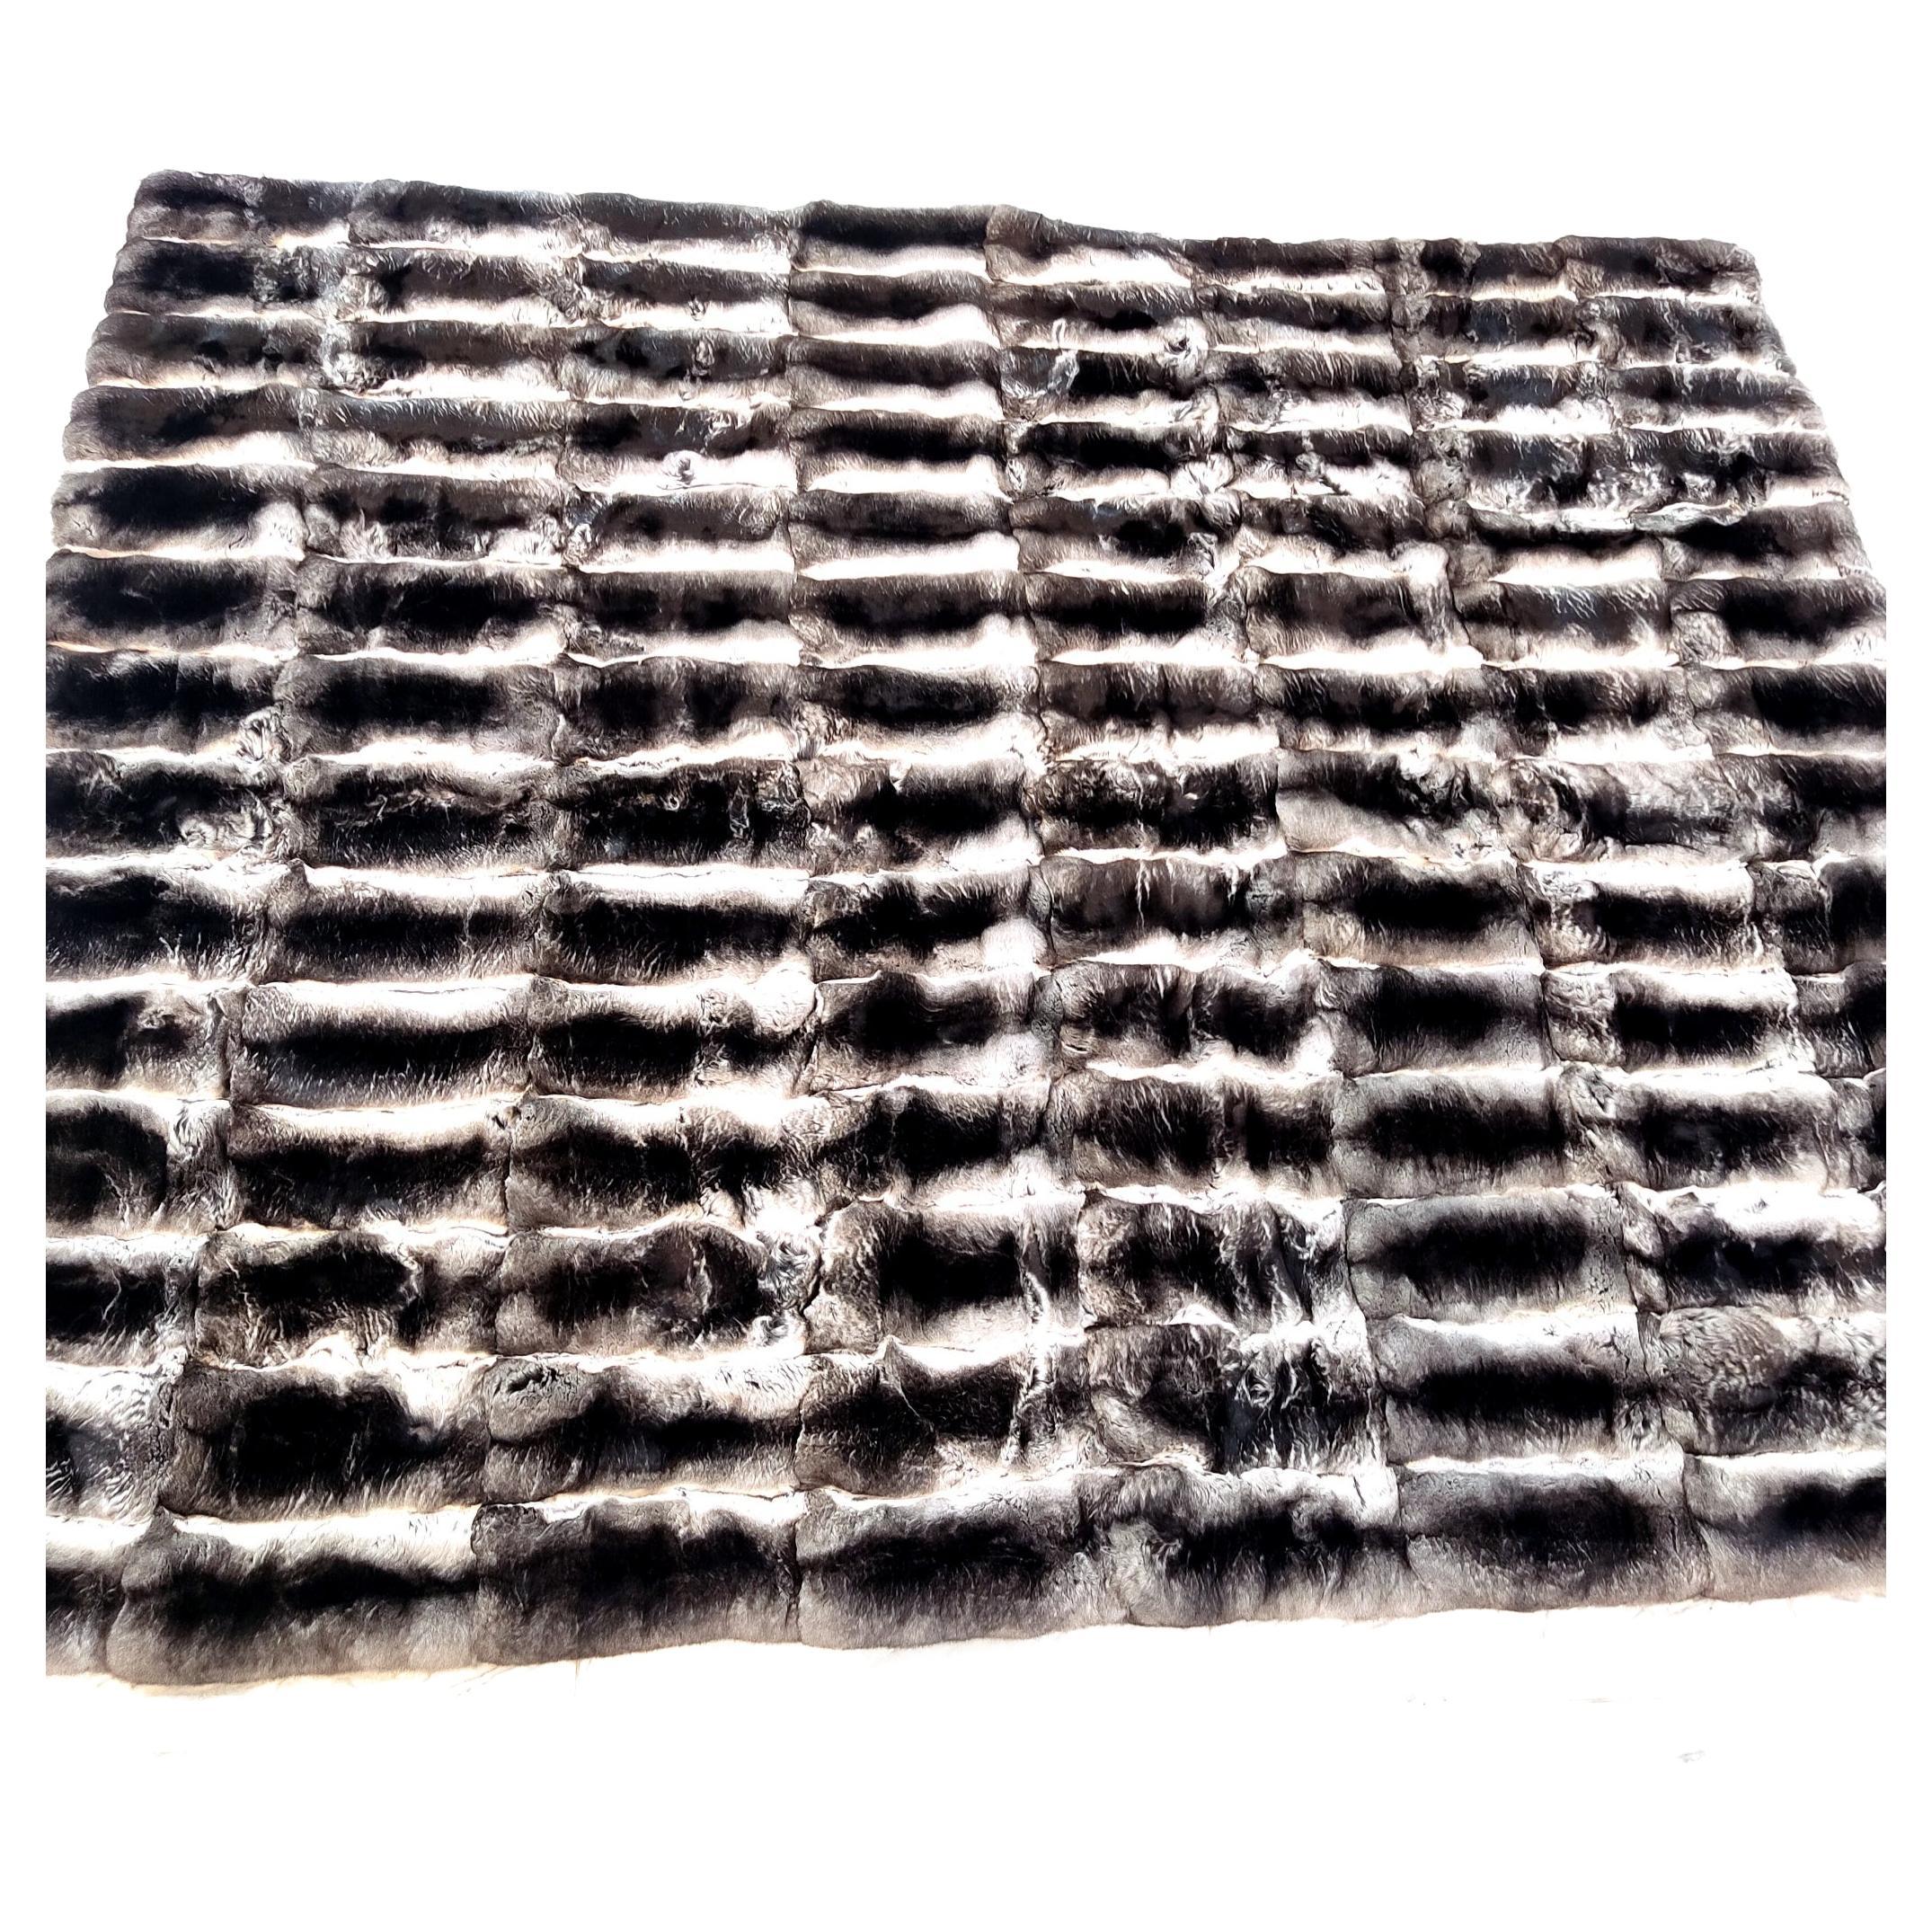 
~~ Brand New Black Velvet Chinchilla fur blanket Loro Piana lining tags Queen

Details:

Brand new Chinchilla blanket and Loro Piana lining Queen size

75 inches long length

60 inches wide length

Black velvet Chinchilla skins

High level